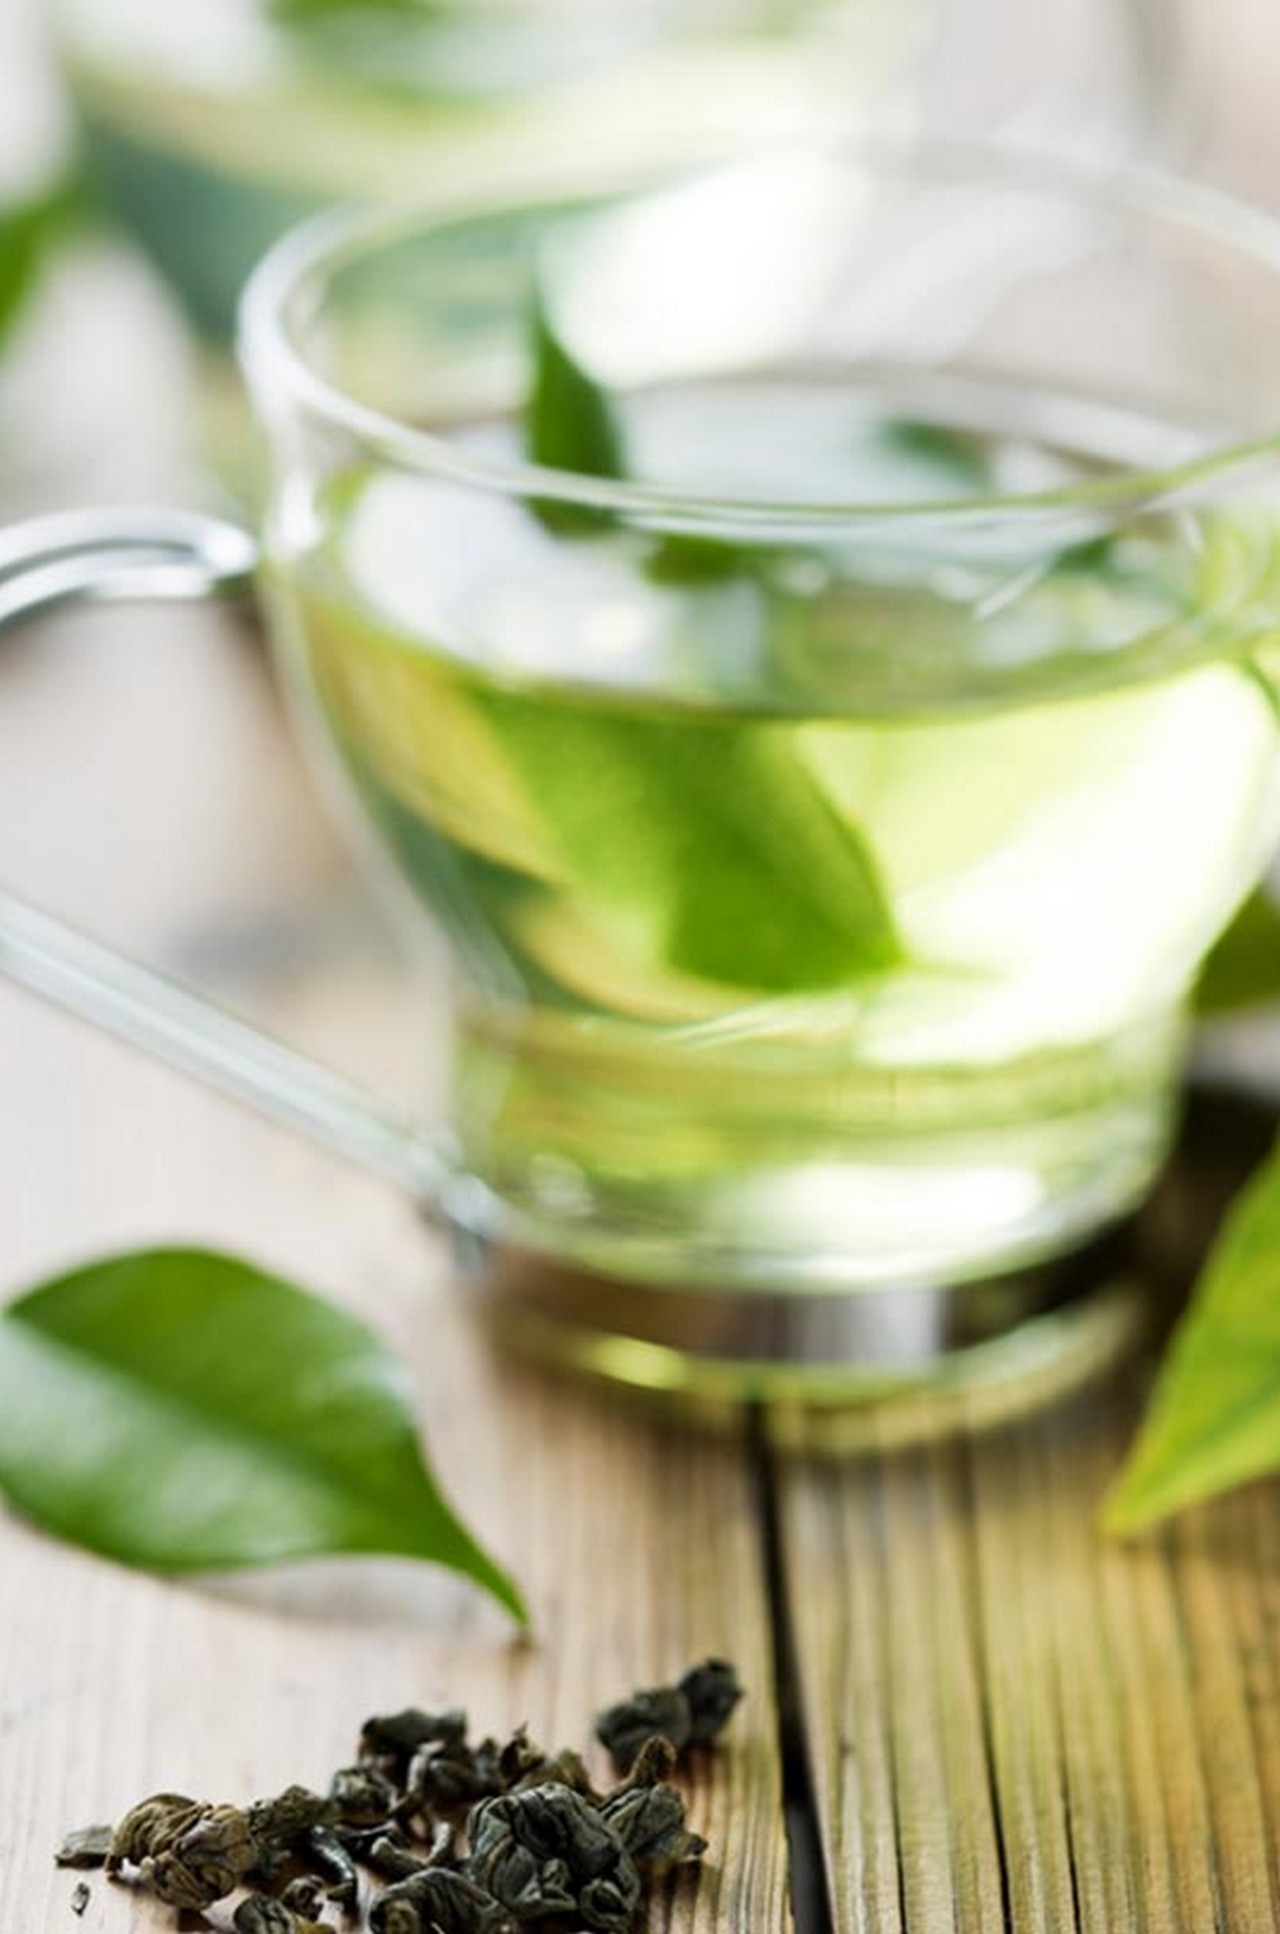  15 Side Effects Of Excess Green Tea Intake